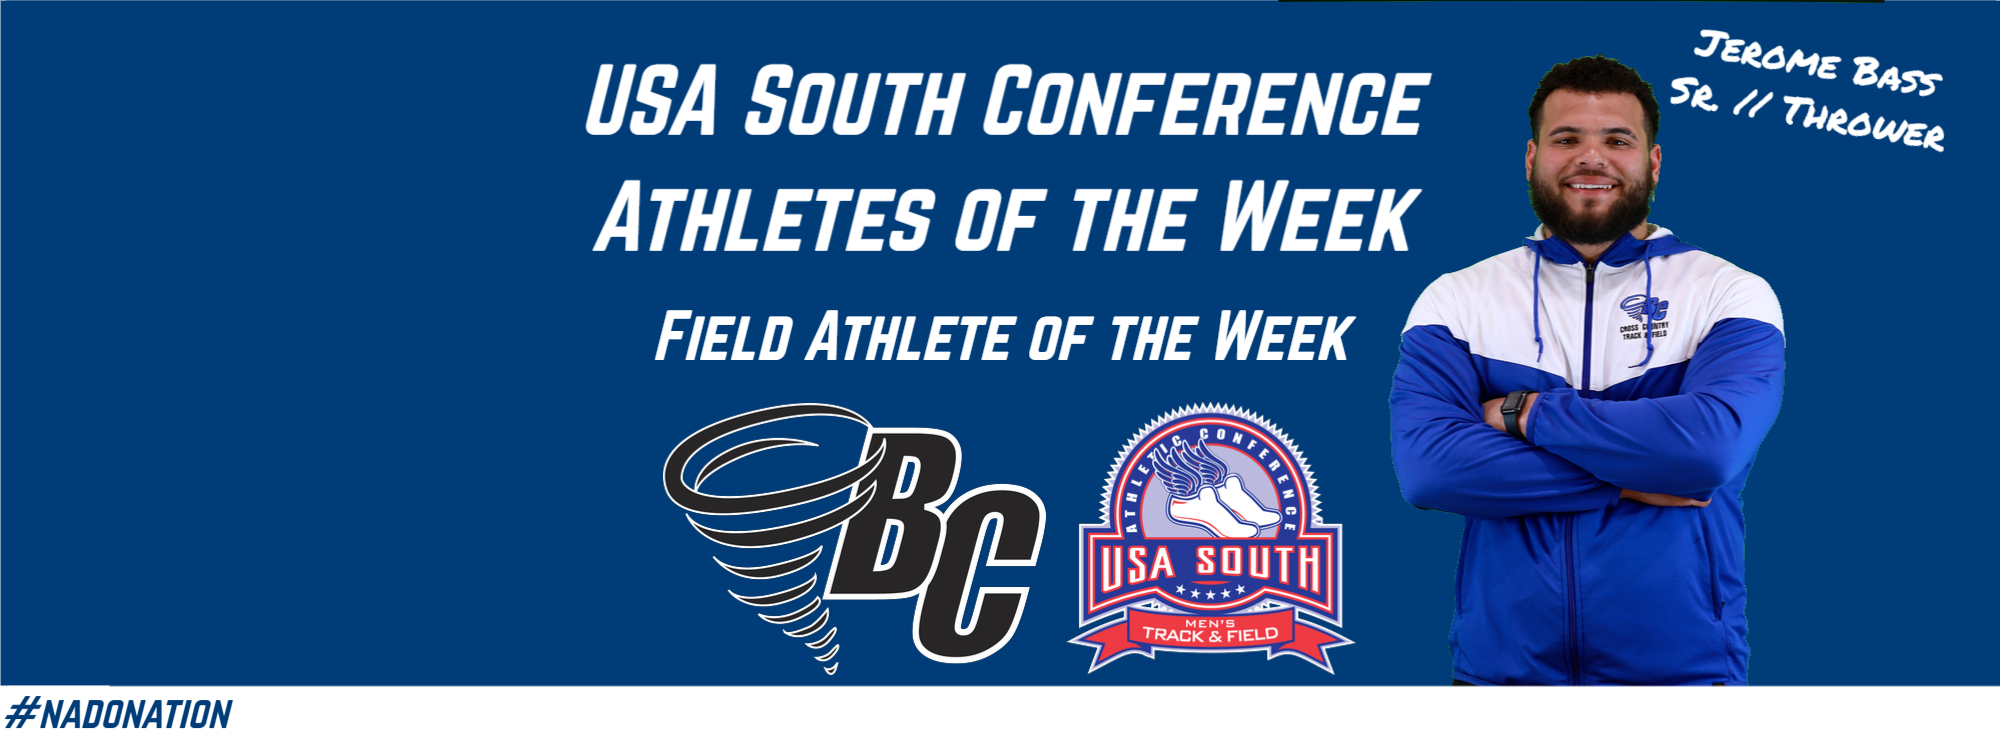 Bass Selected as USA South Field Athlete of the Week after Steller Showing at LR Bear Invitational